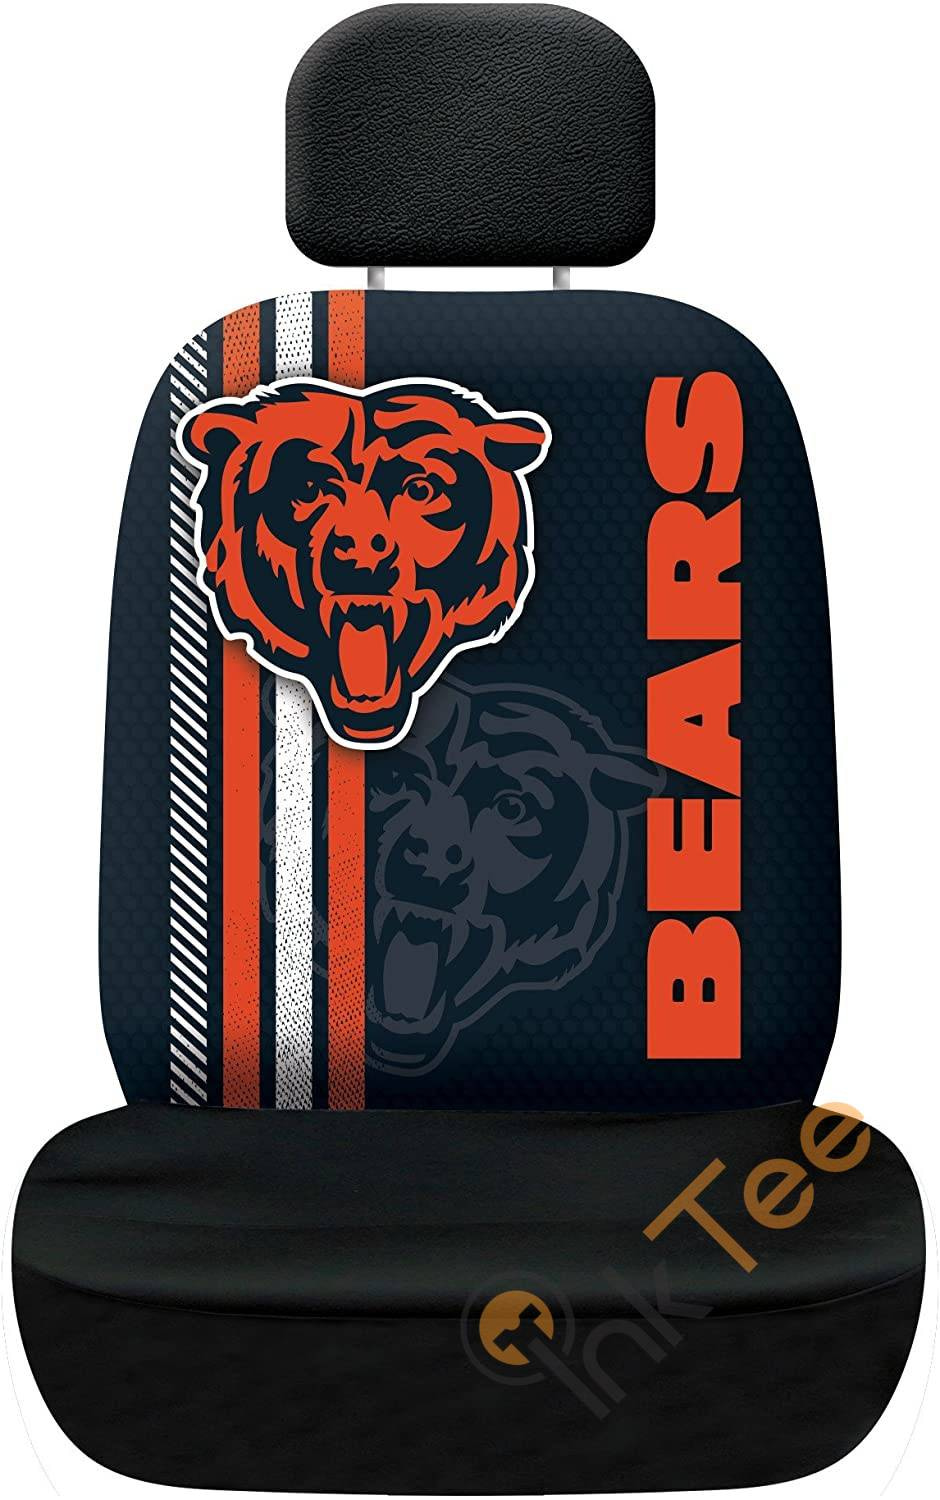 Nfl Chicago Bears Team Seat Cover